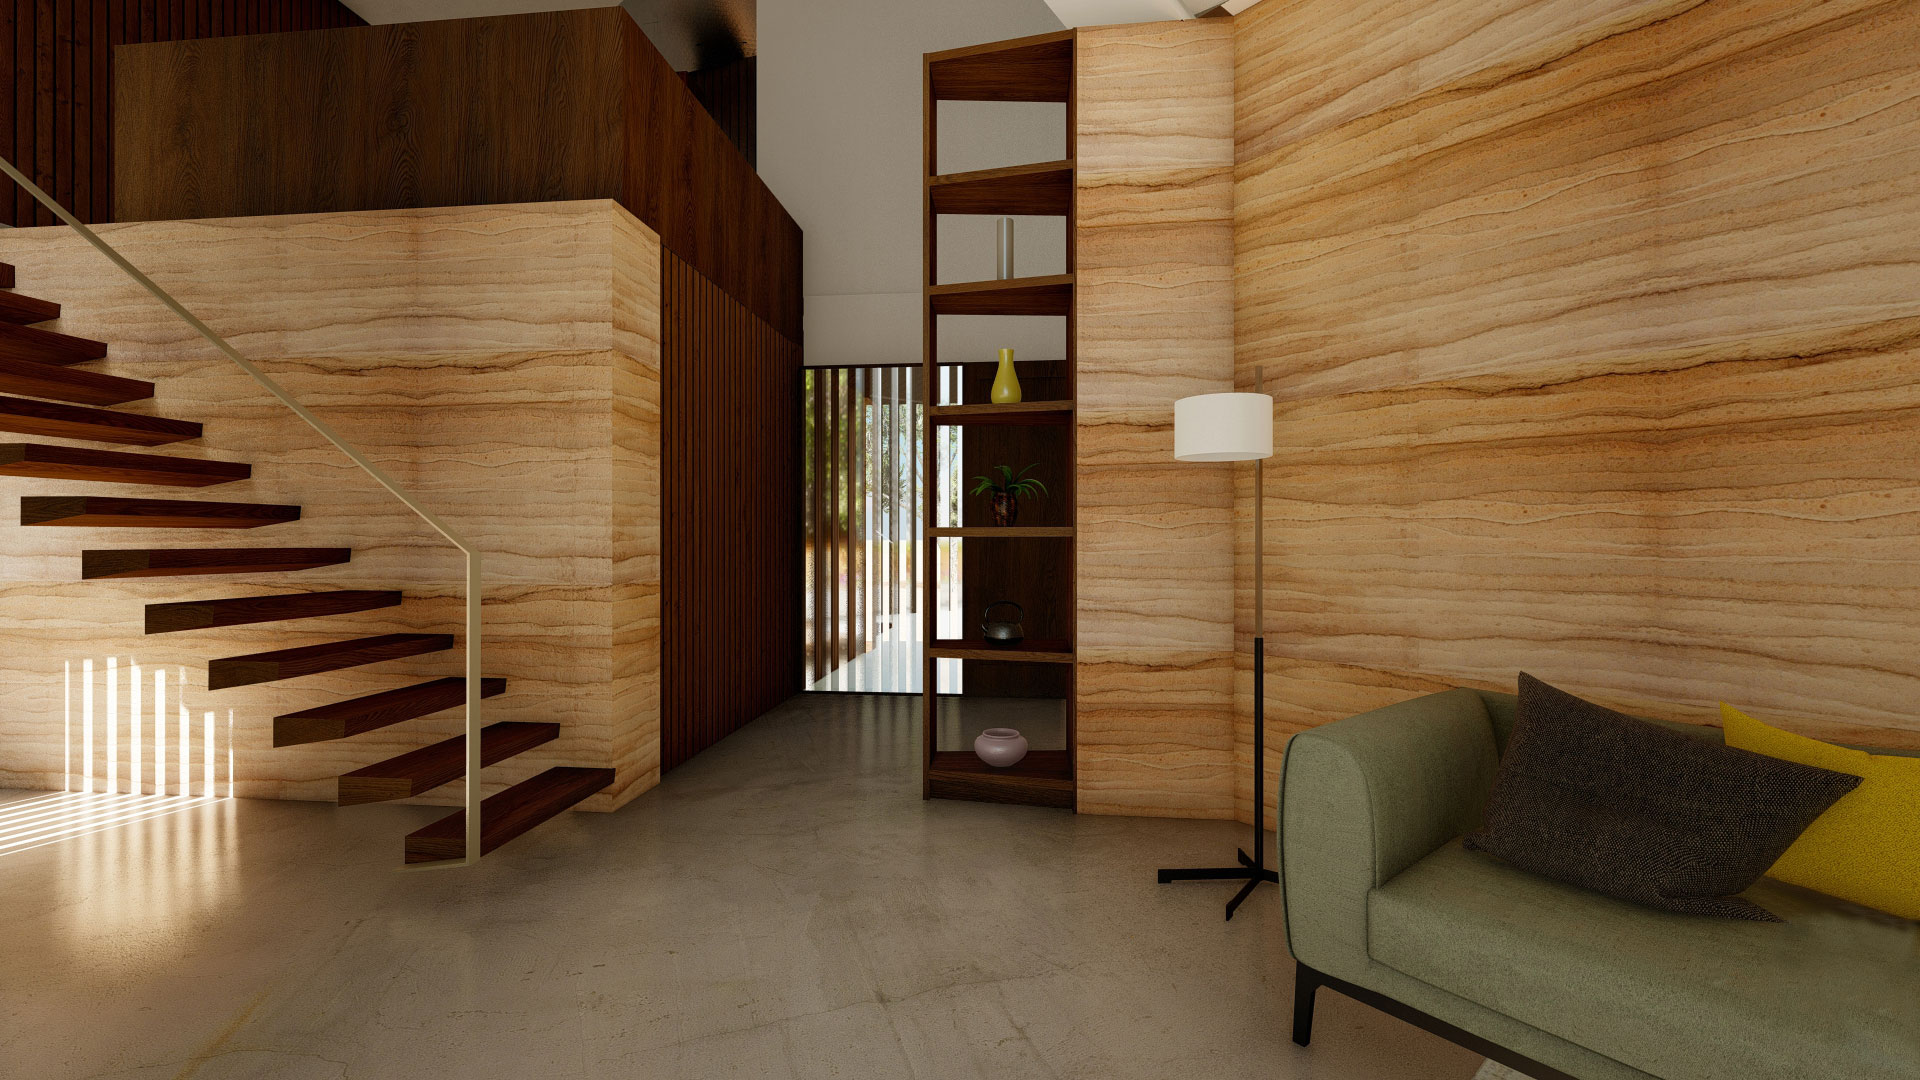 Rammed earth wall in passive house matarraña. Designed by Zest Architecture.